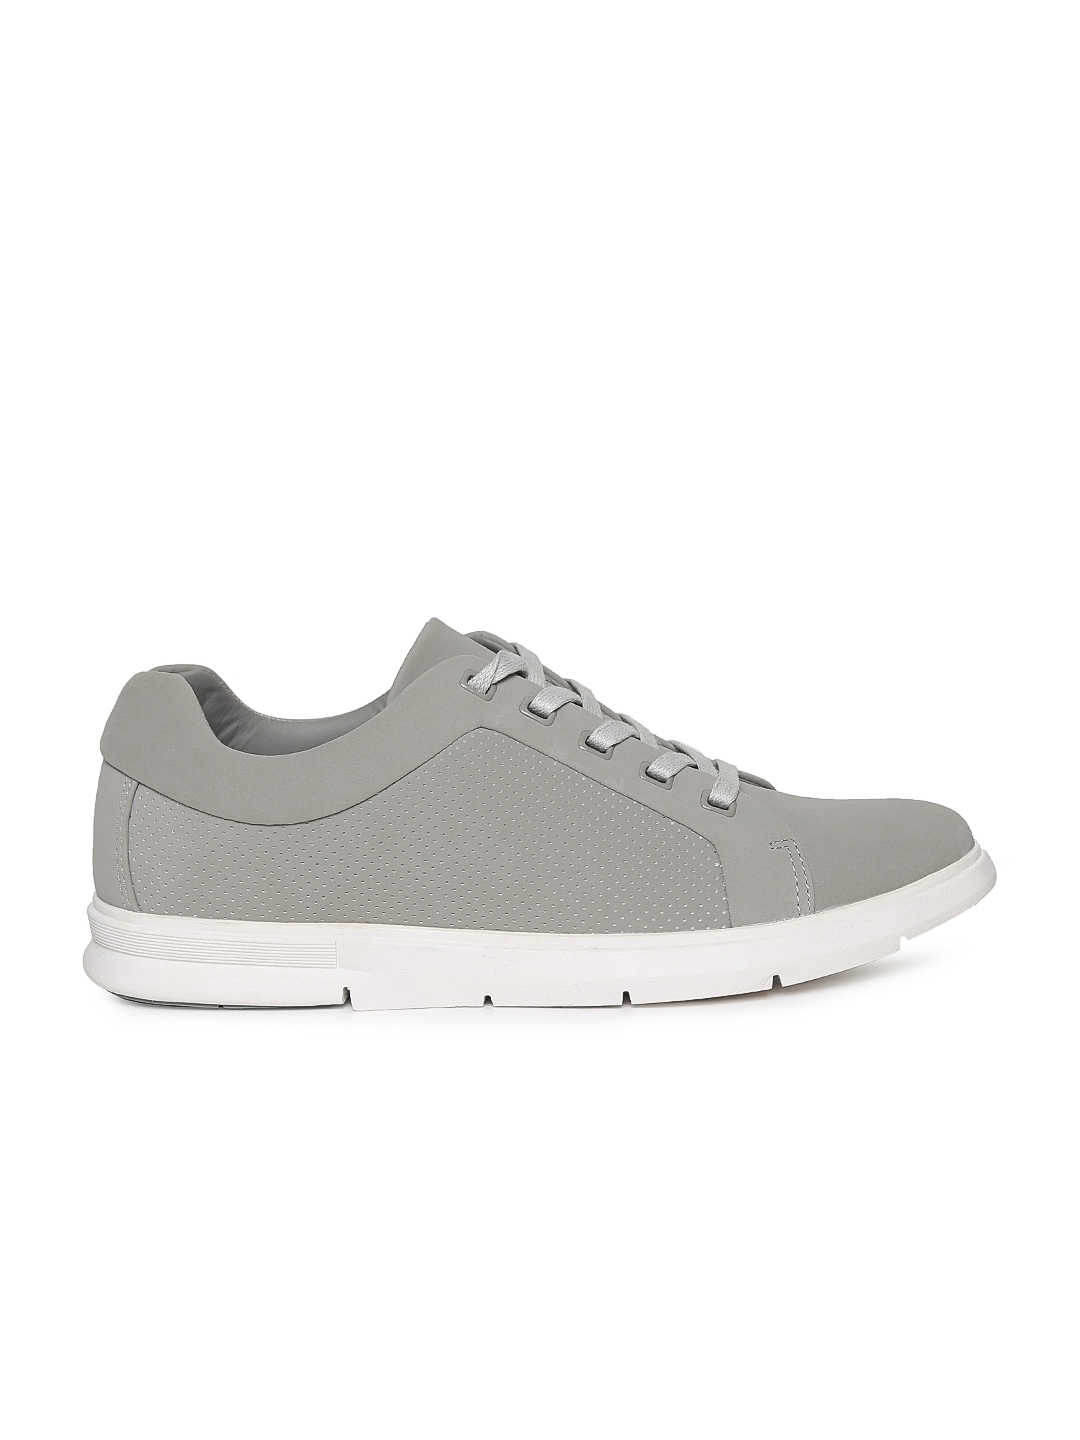 Ether Men Grey Sneakers - Casual Shoes 